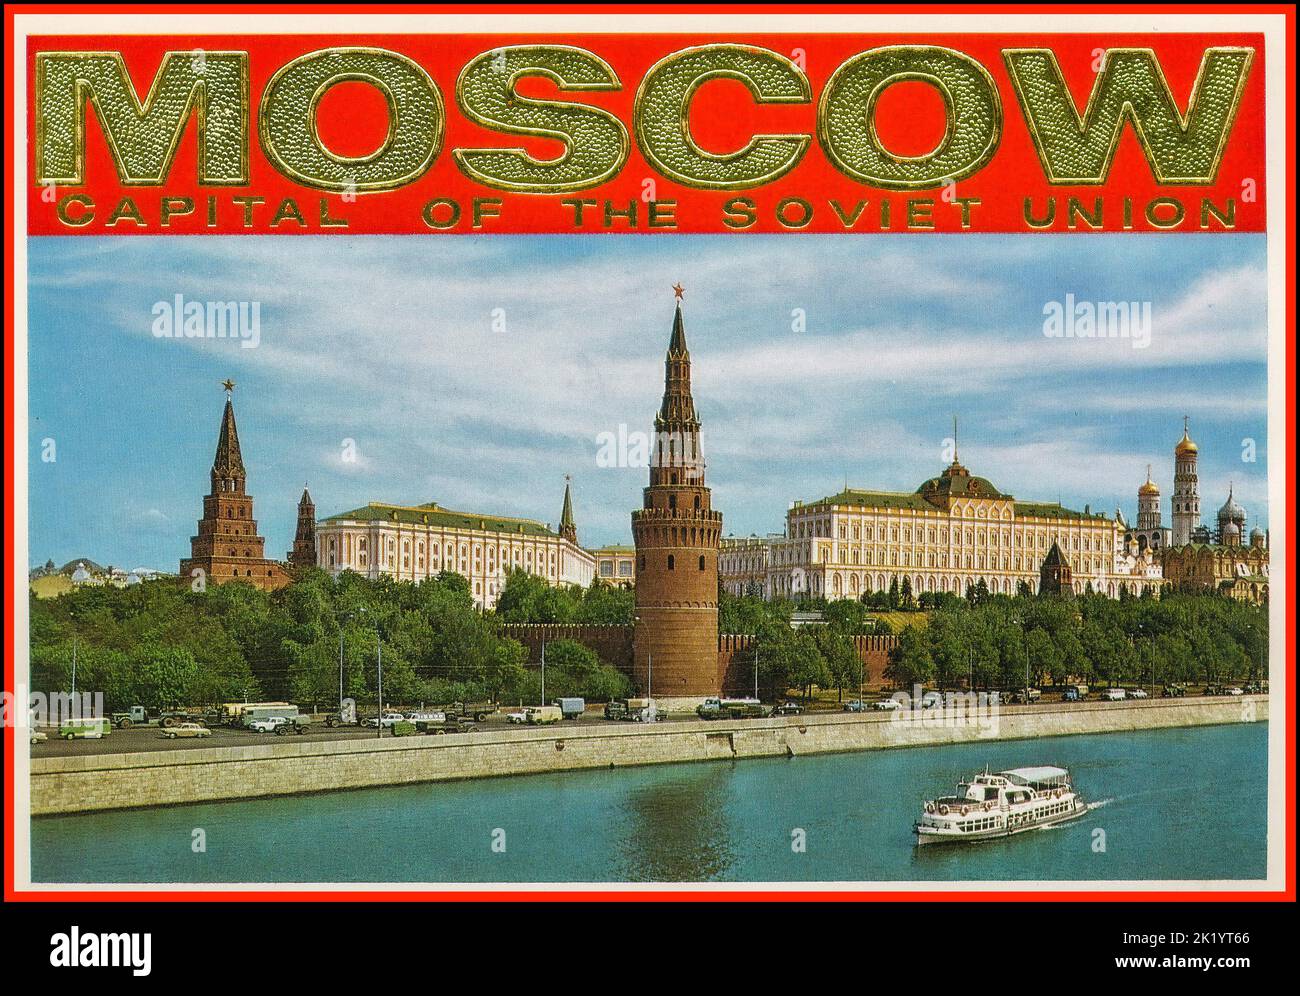 Vintage Moscow Capital of the Soviet Union Travel Brochure cover 1960s USSR Soviet Union Russia Moskva River Stock Photo